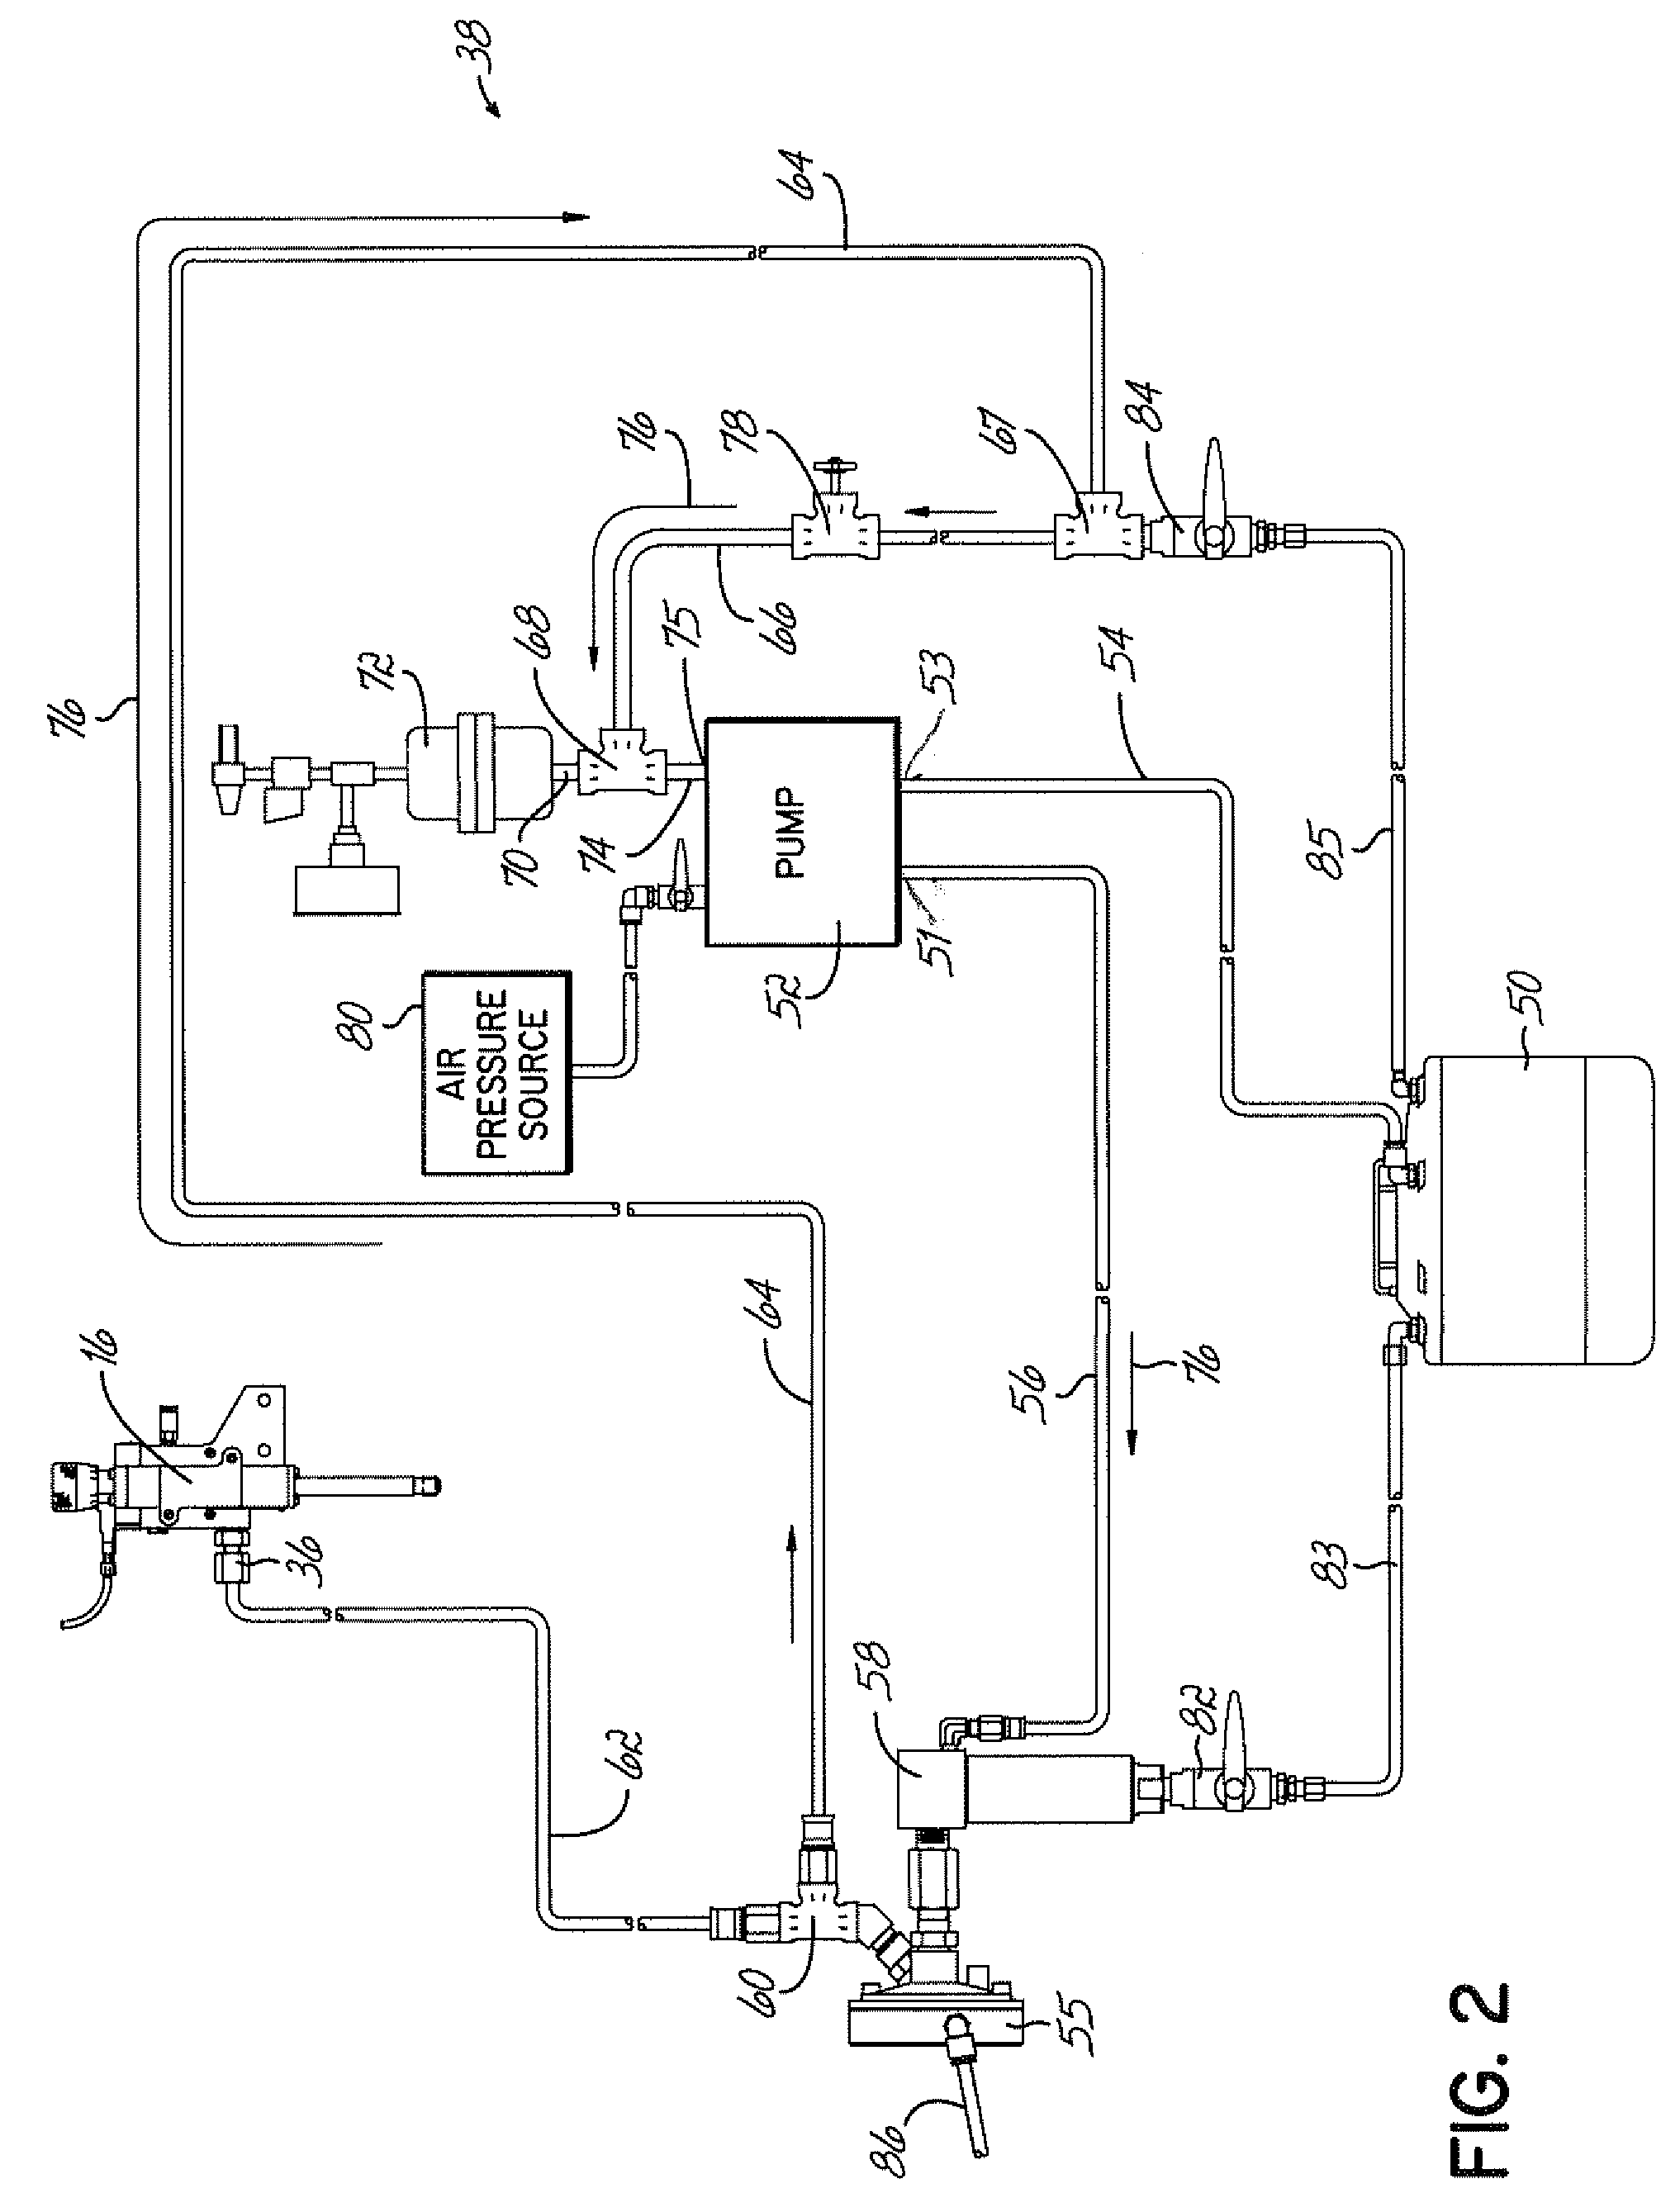 Closed-loop bubble elimination system and methods for applying a conformal coating material to a substrate